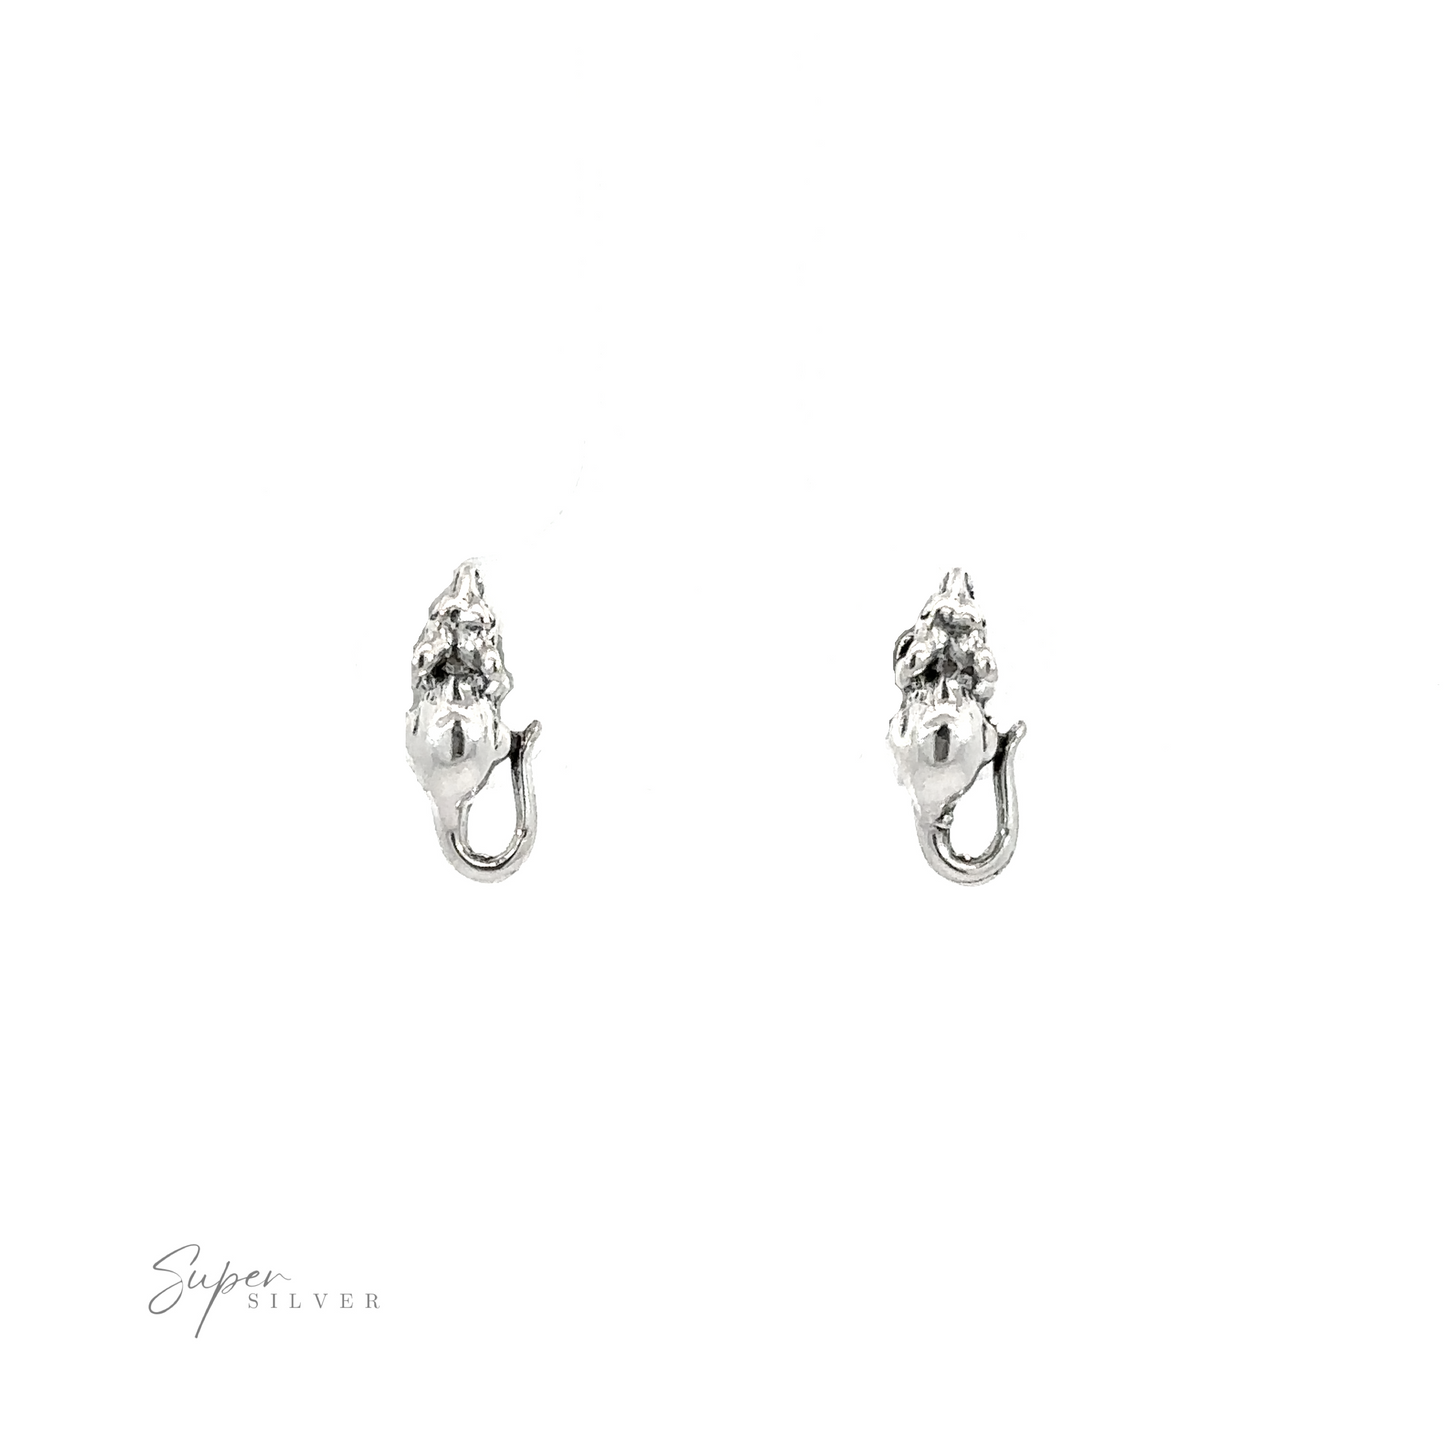 A pair of Mice Studs on a white background.